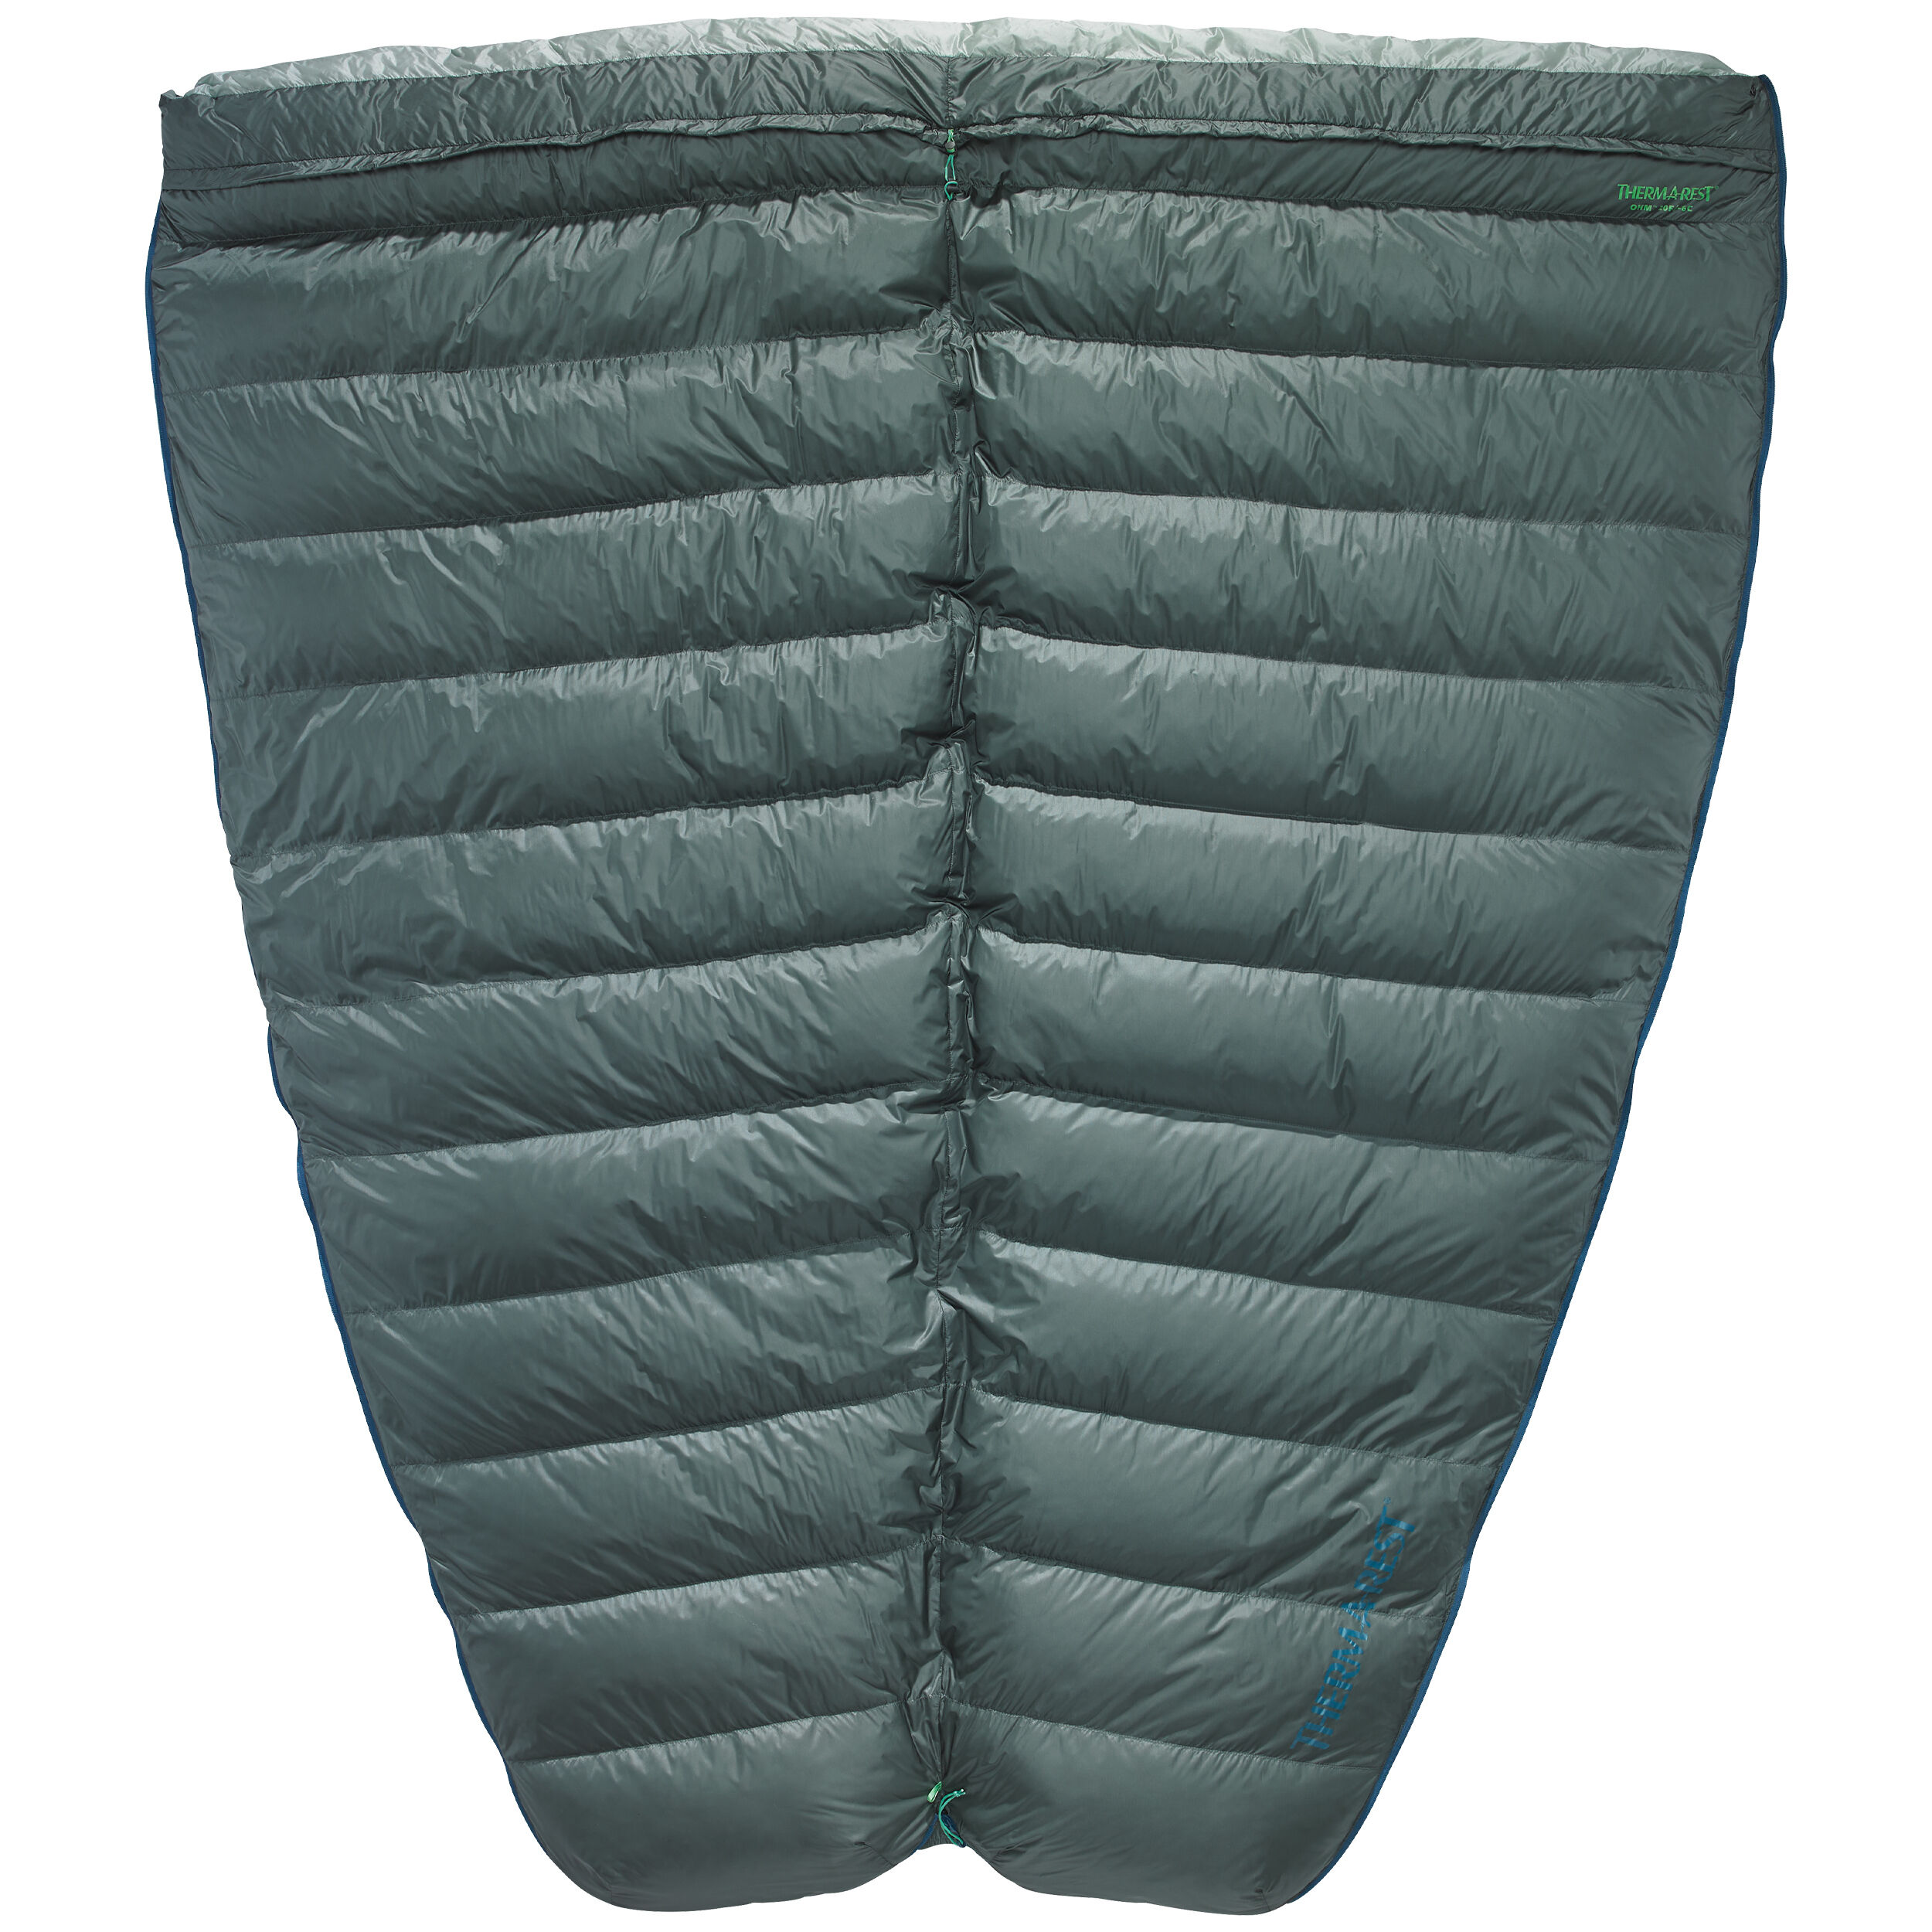 Ohm™ 20F/-6C Sleeping Bag | Down Sleeping Bags | Therm-a-Rest®